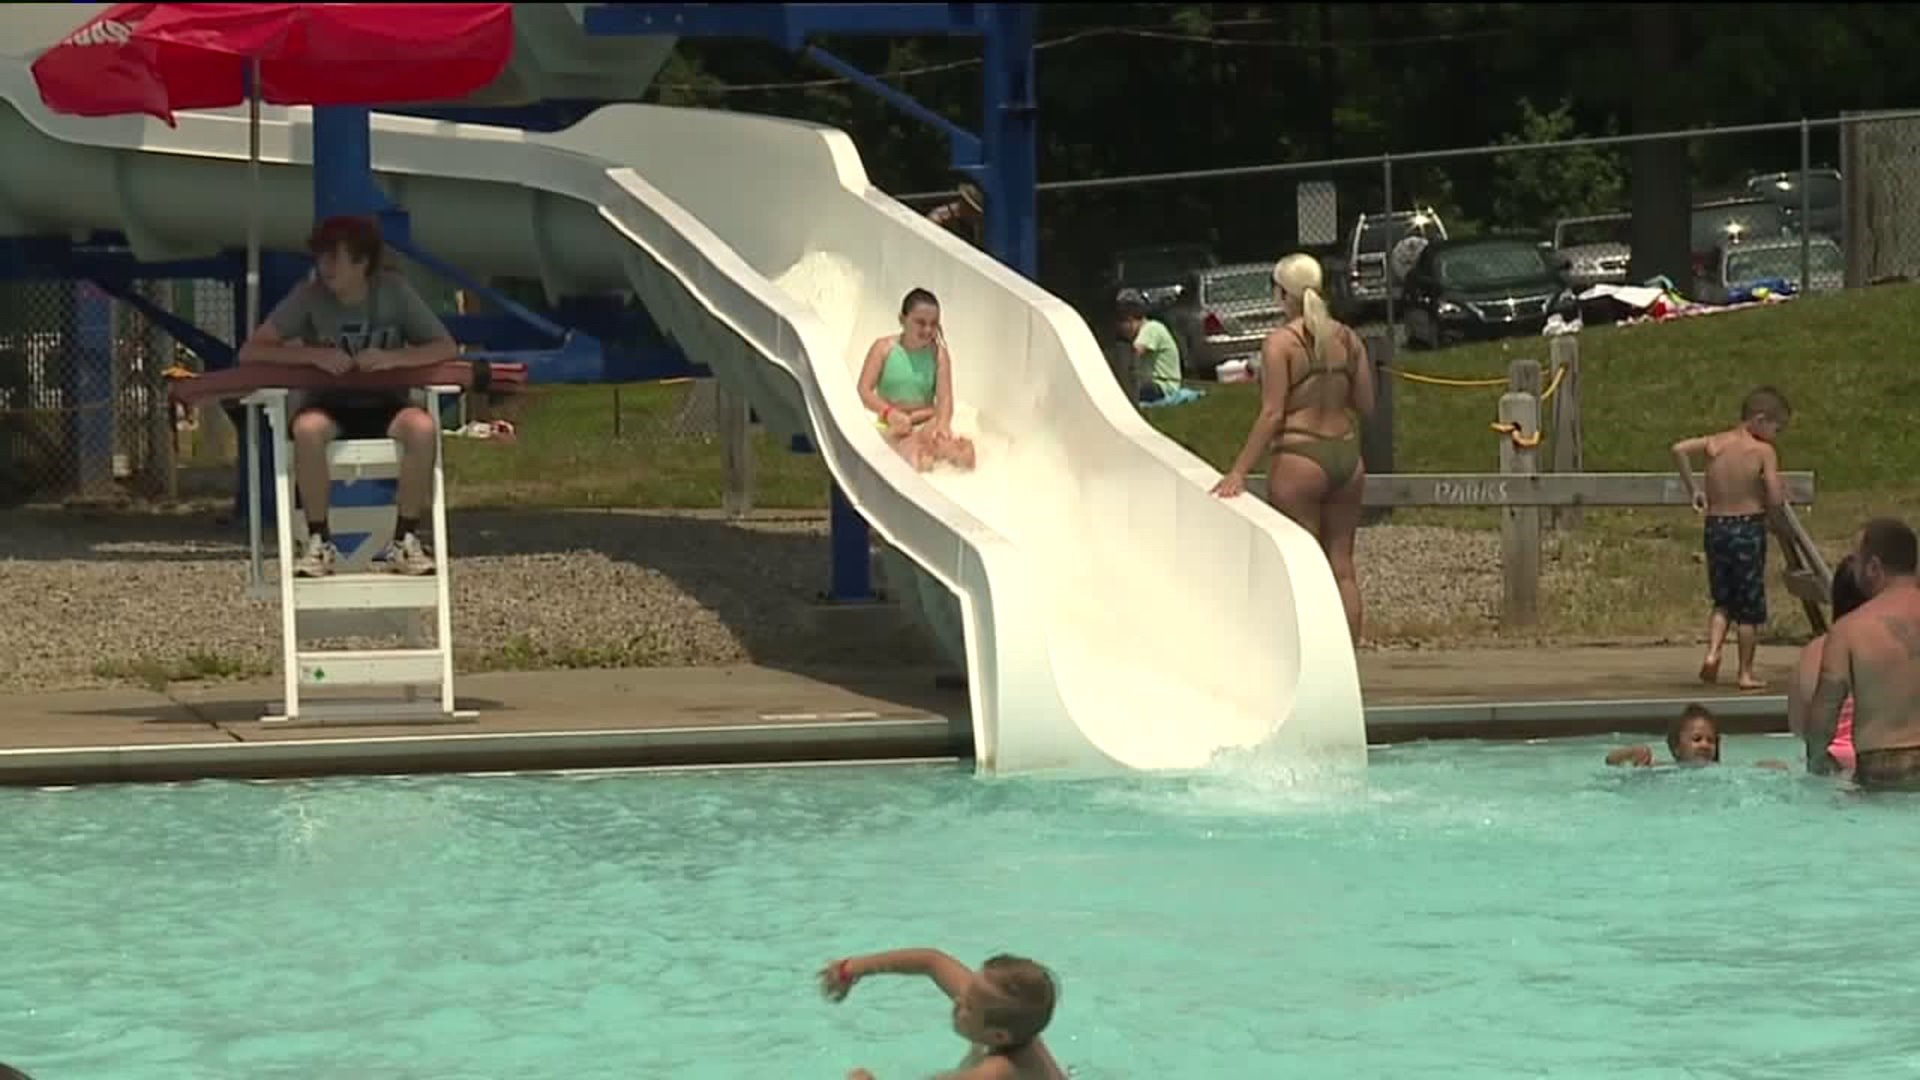 Nay Aug Park Pool Popular on Hot Day